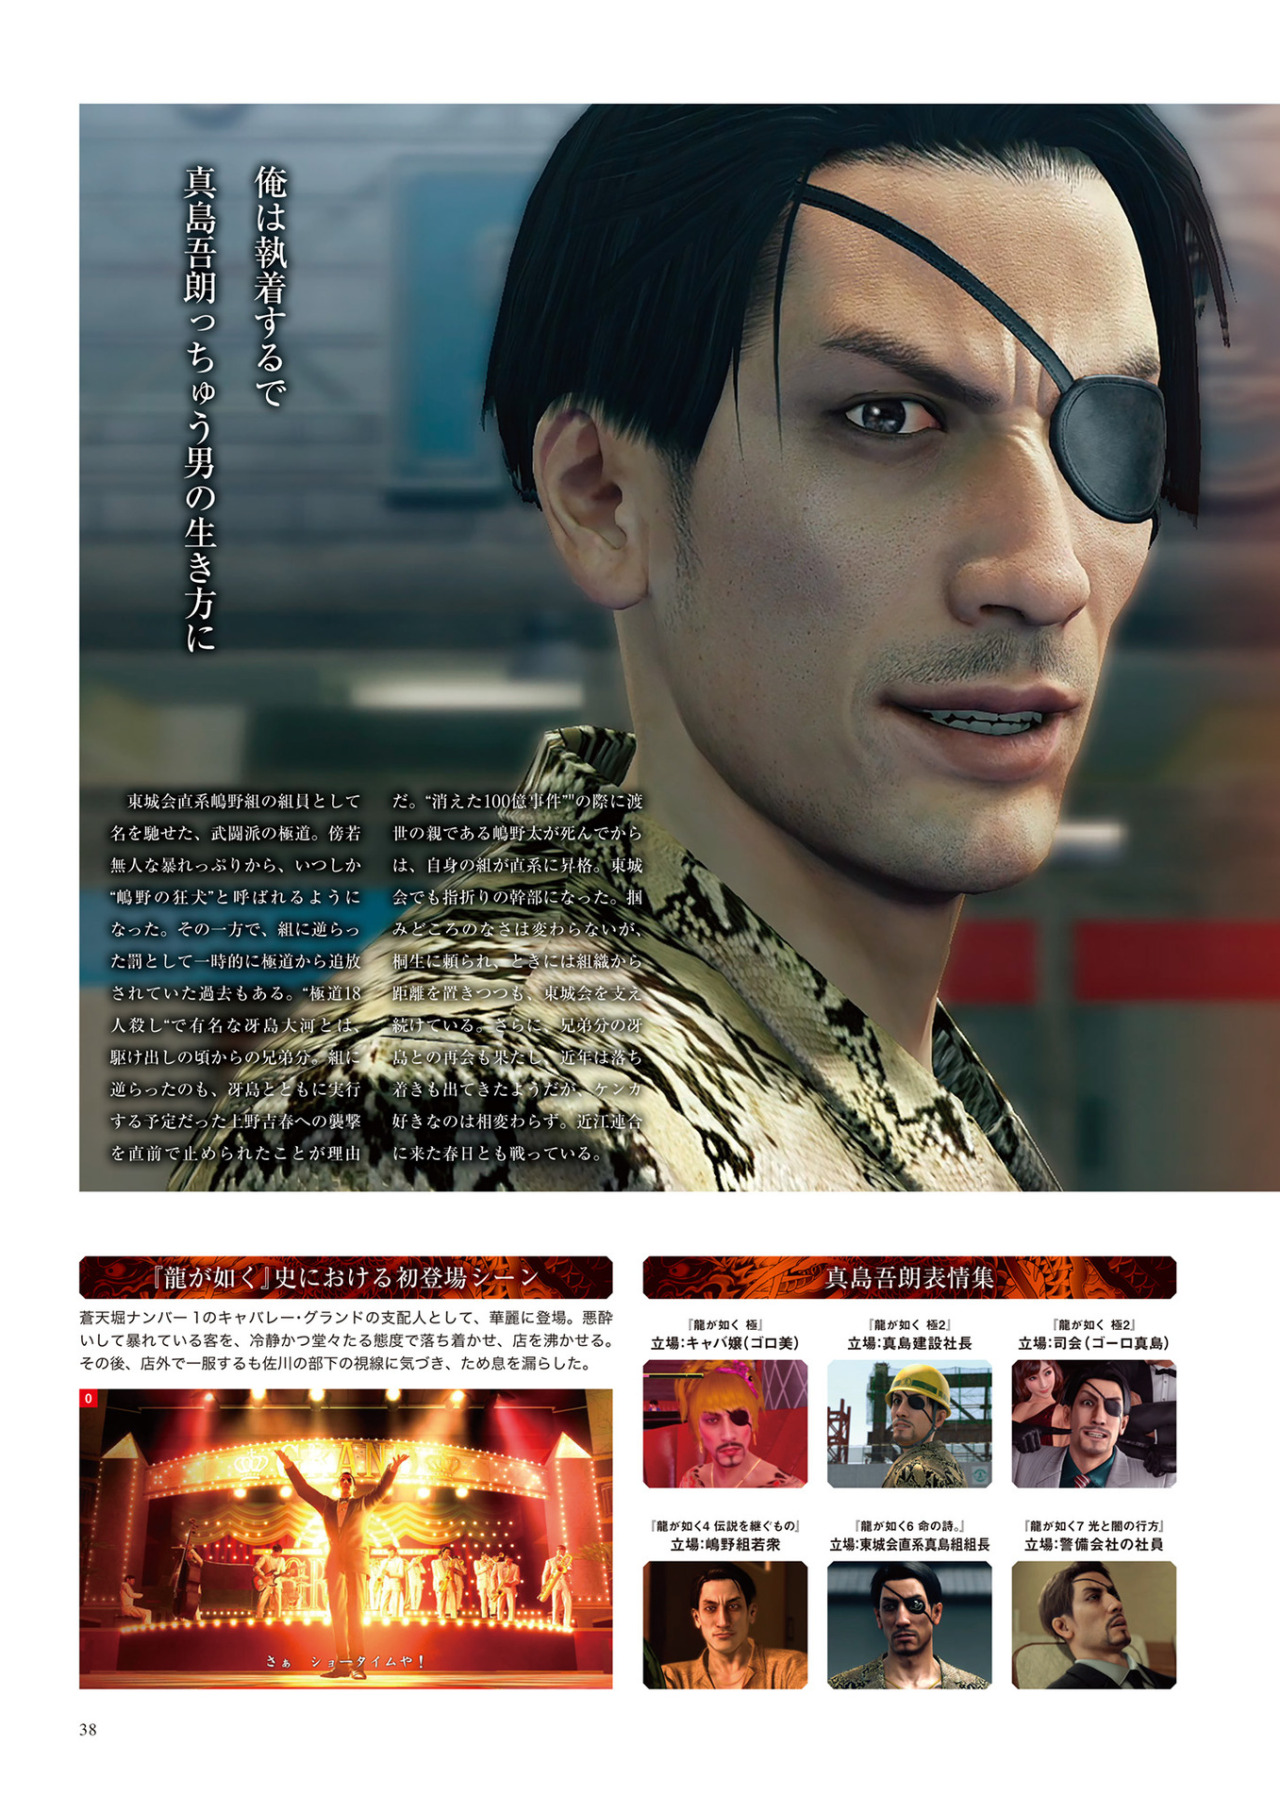 Gamer Time Chapter 2 Lead Actors Majima Goro From The